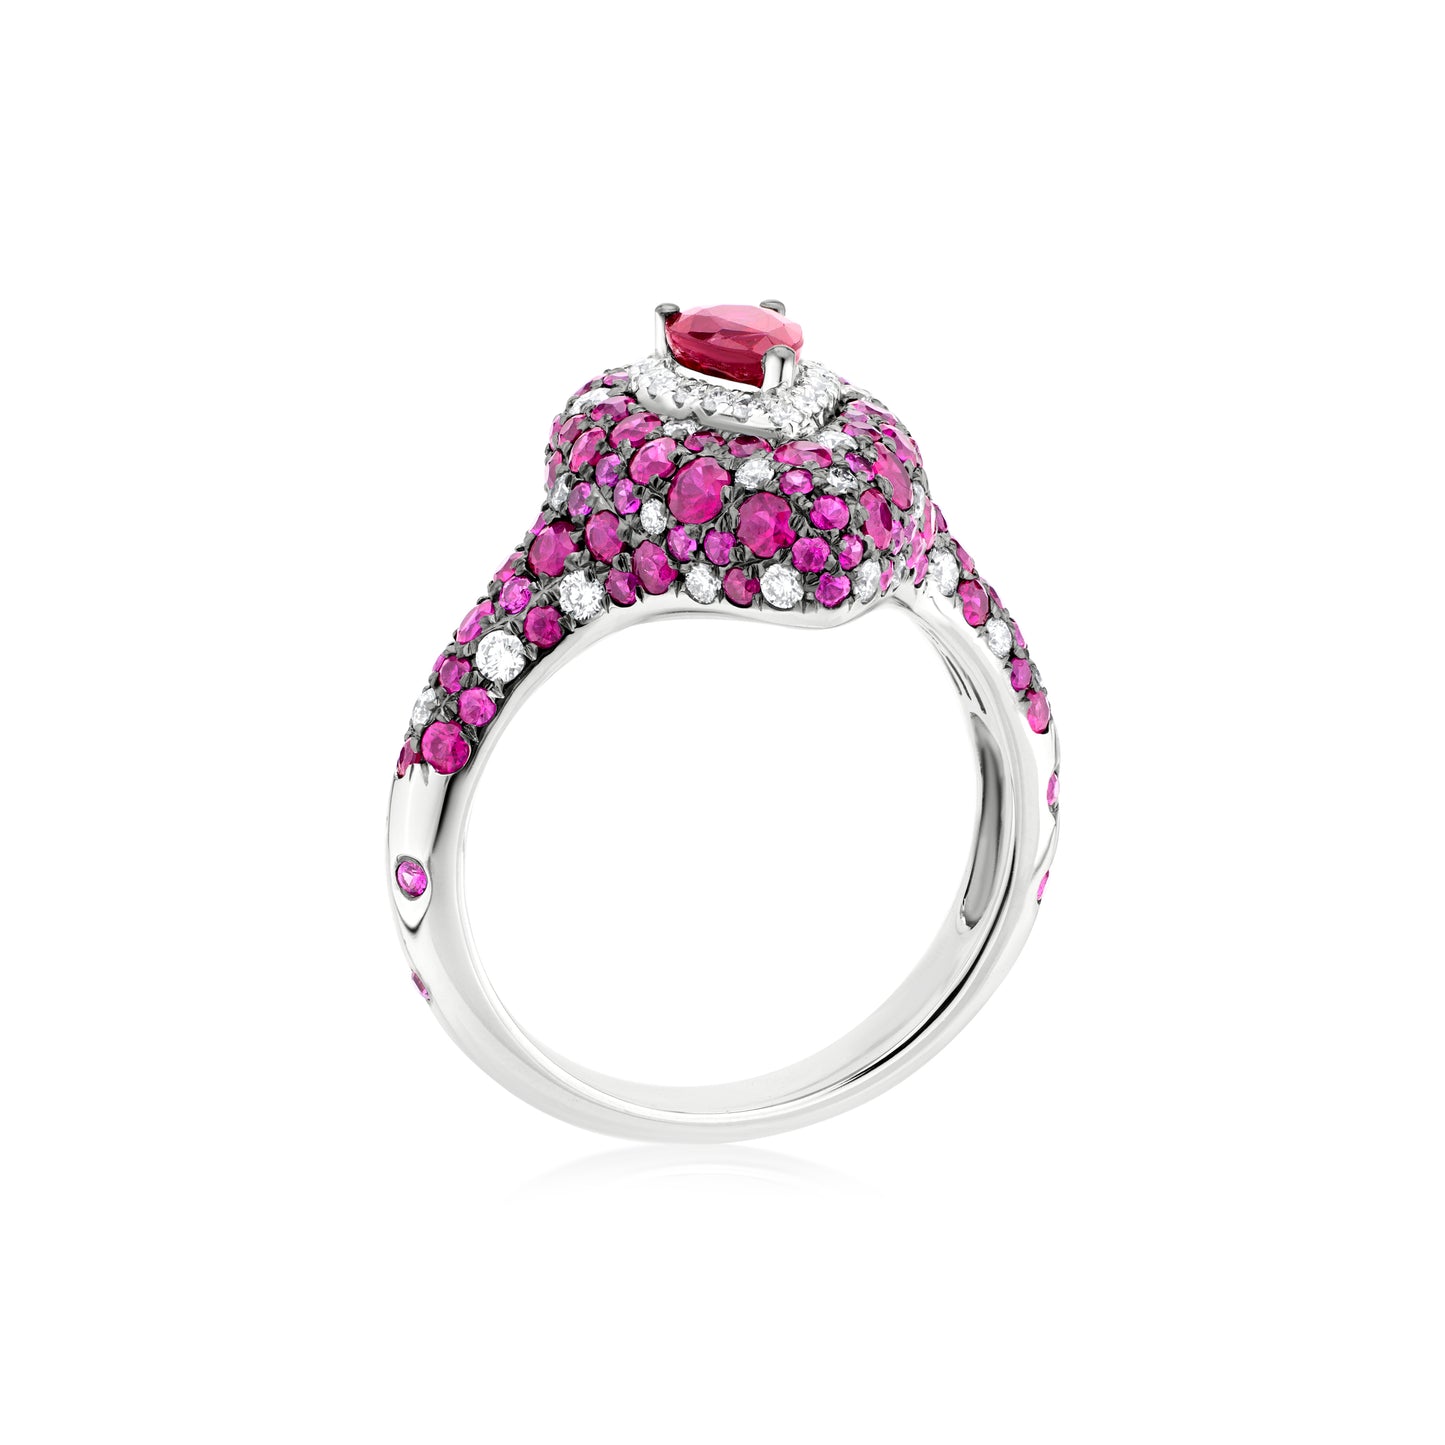 Ring With Ruby And Diamond In 18K White Gold And Black Rhodium